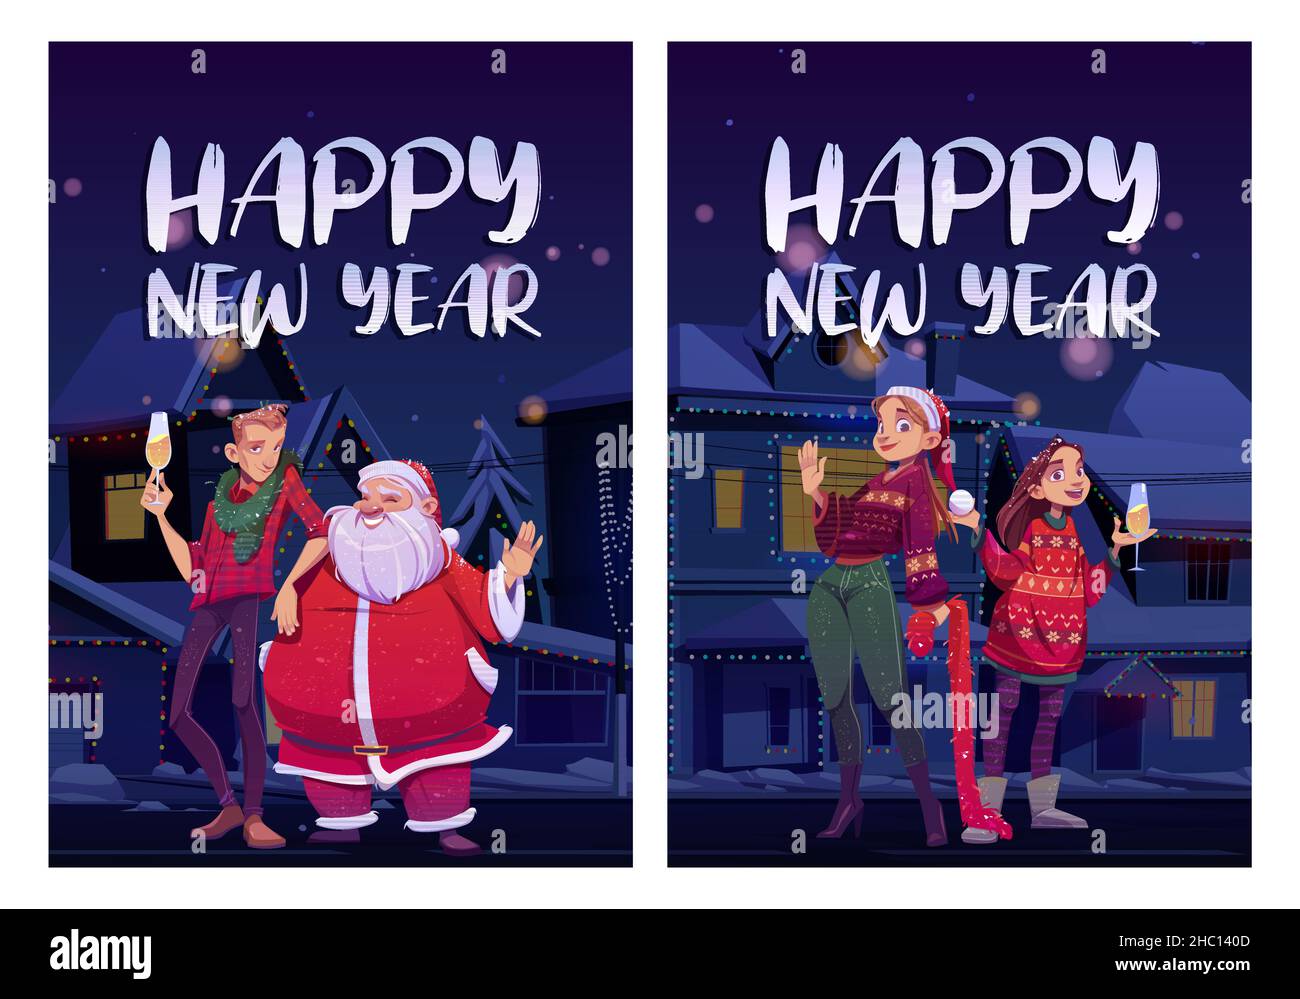 Happy New Year posters with Santa Claus and people with champagne on street at night. Vector greeting card with cartoon illustration with girls, guy and man in red costume celebrate winter holidays Stock Vector